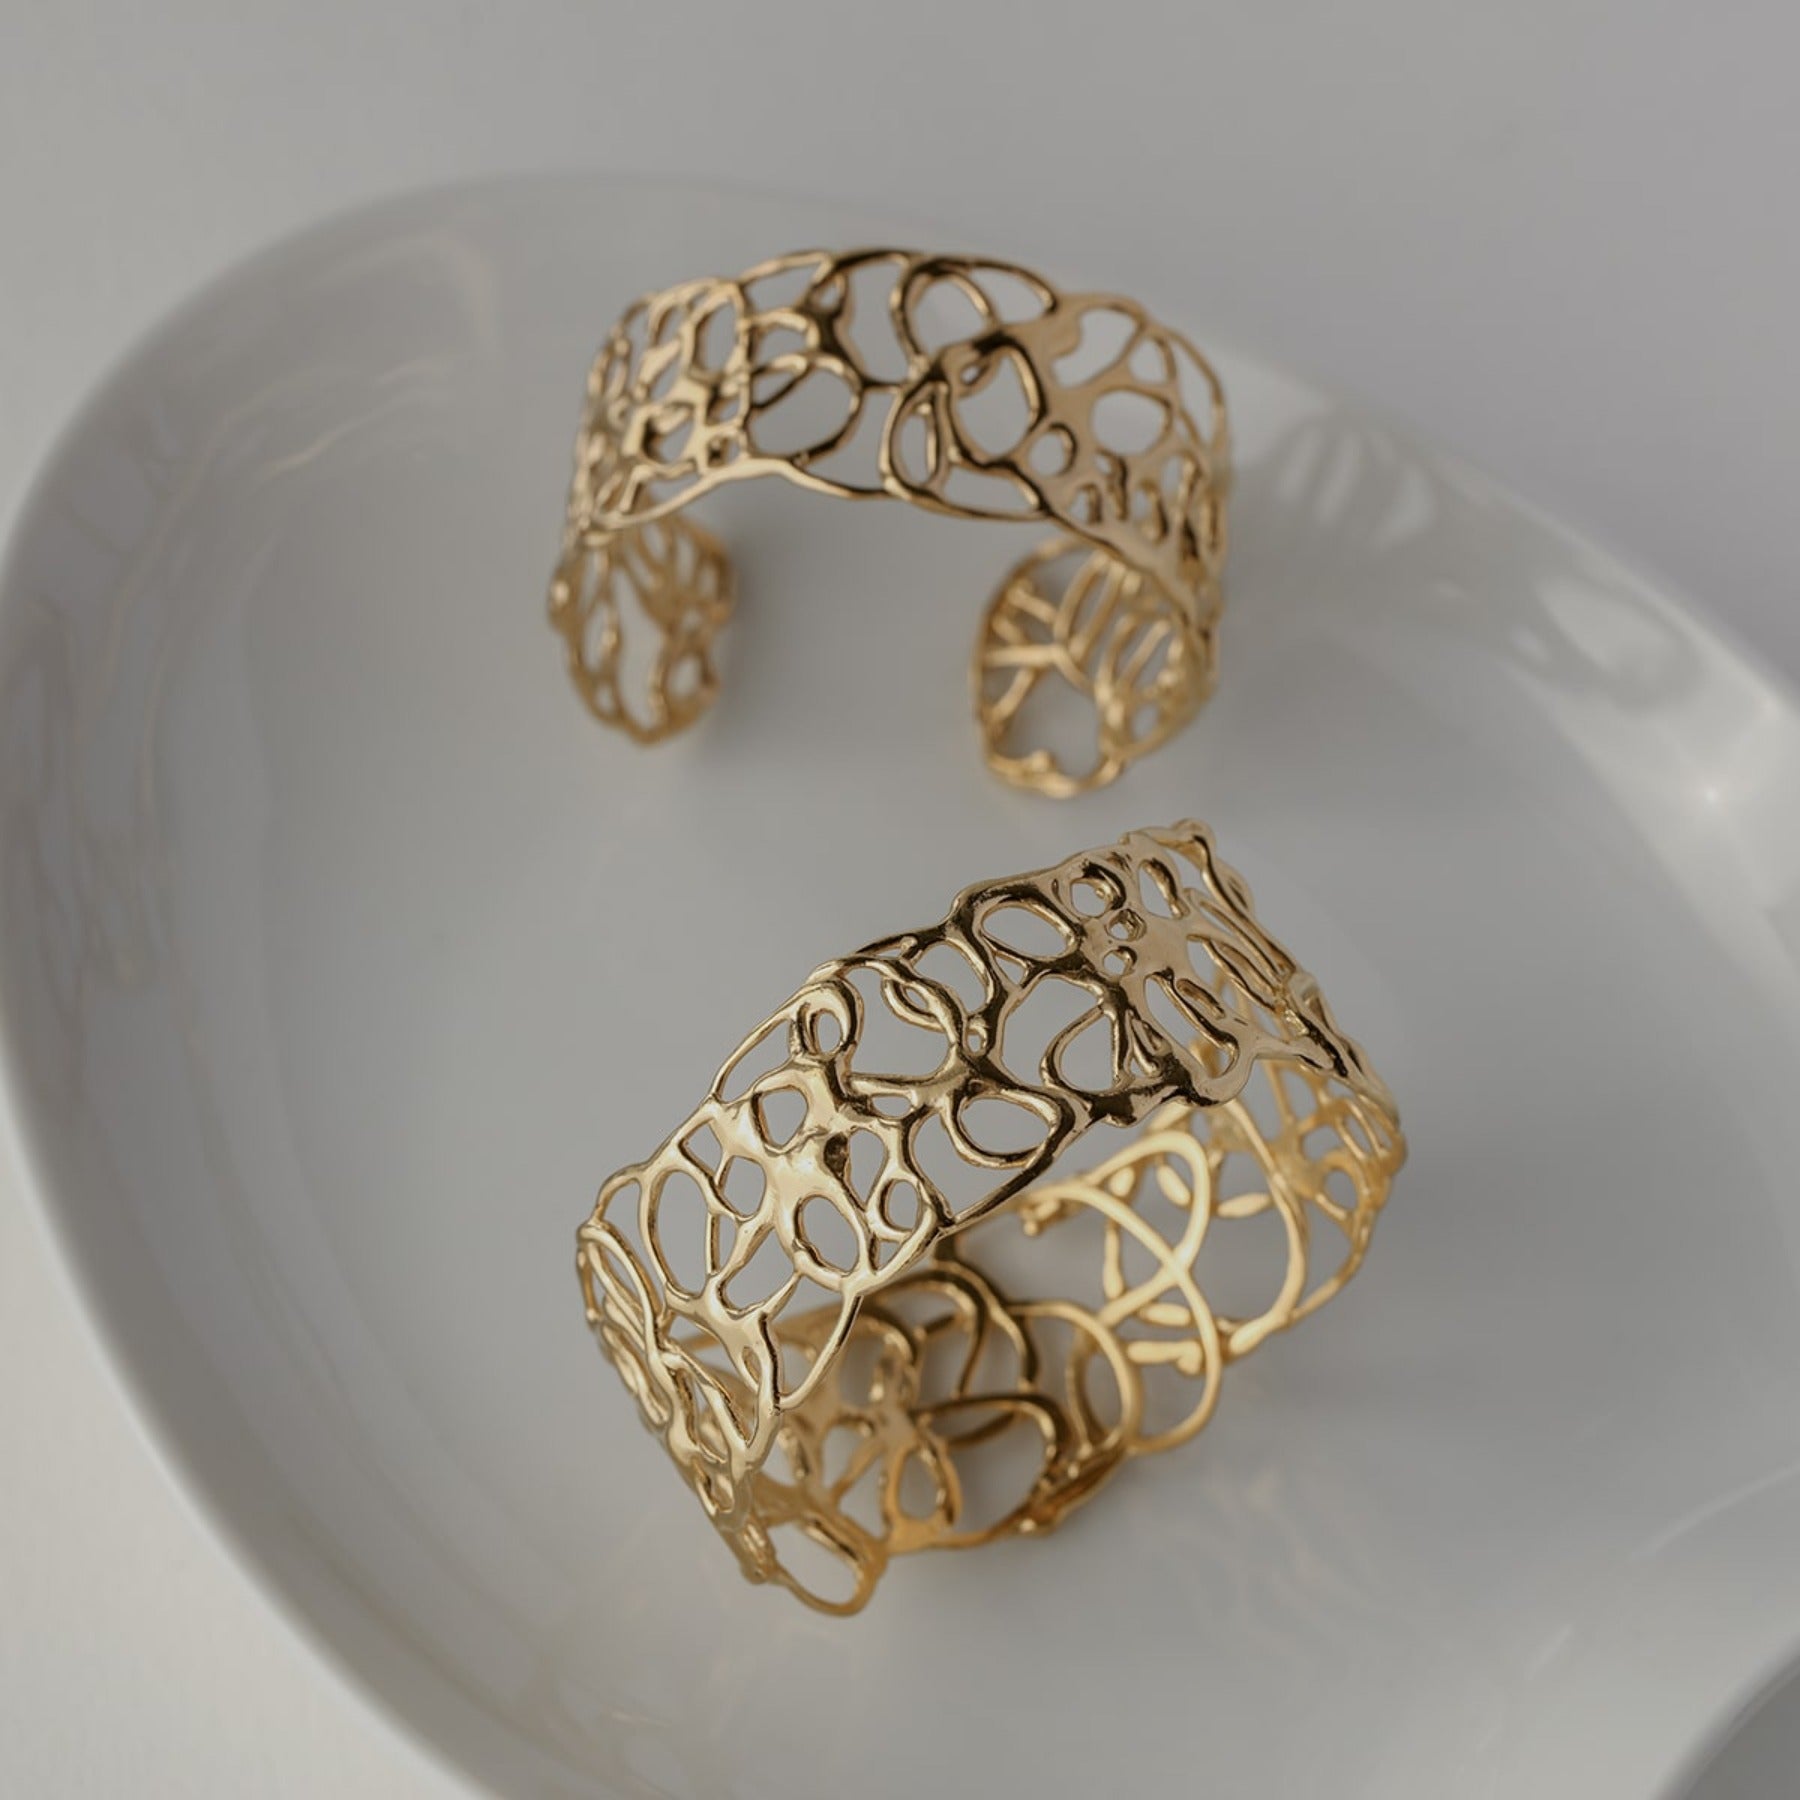 Abstract squiggle wide cuff bracelet in 18k gold vermeil.